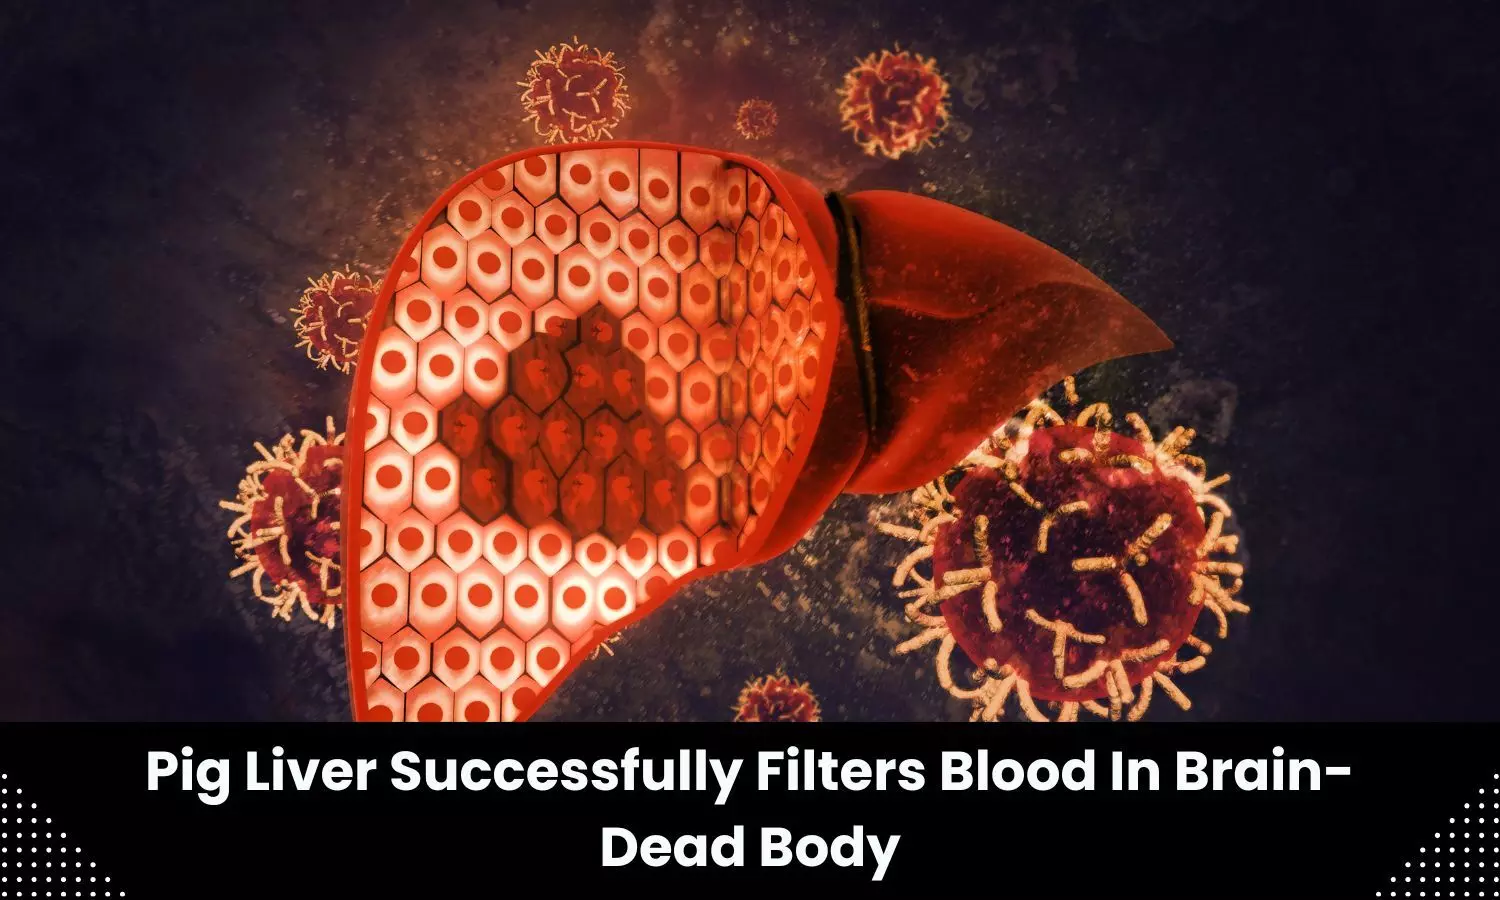 Pig liver successfully filters blood in brain-dead body